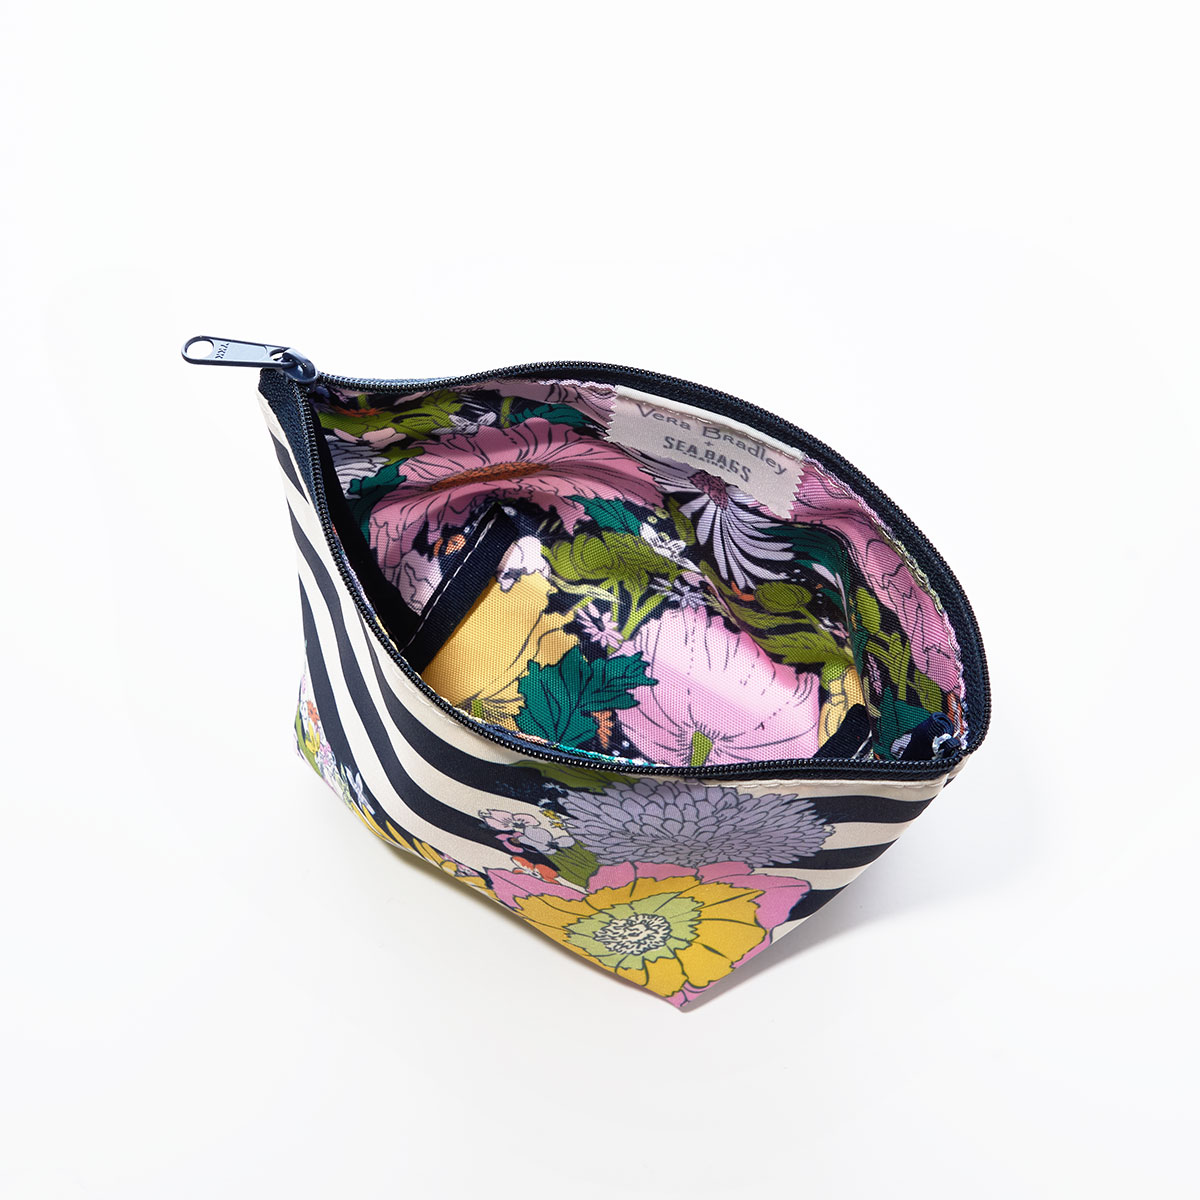 inside view of open cosmetic pouch with bright floral print lining